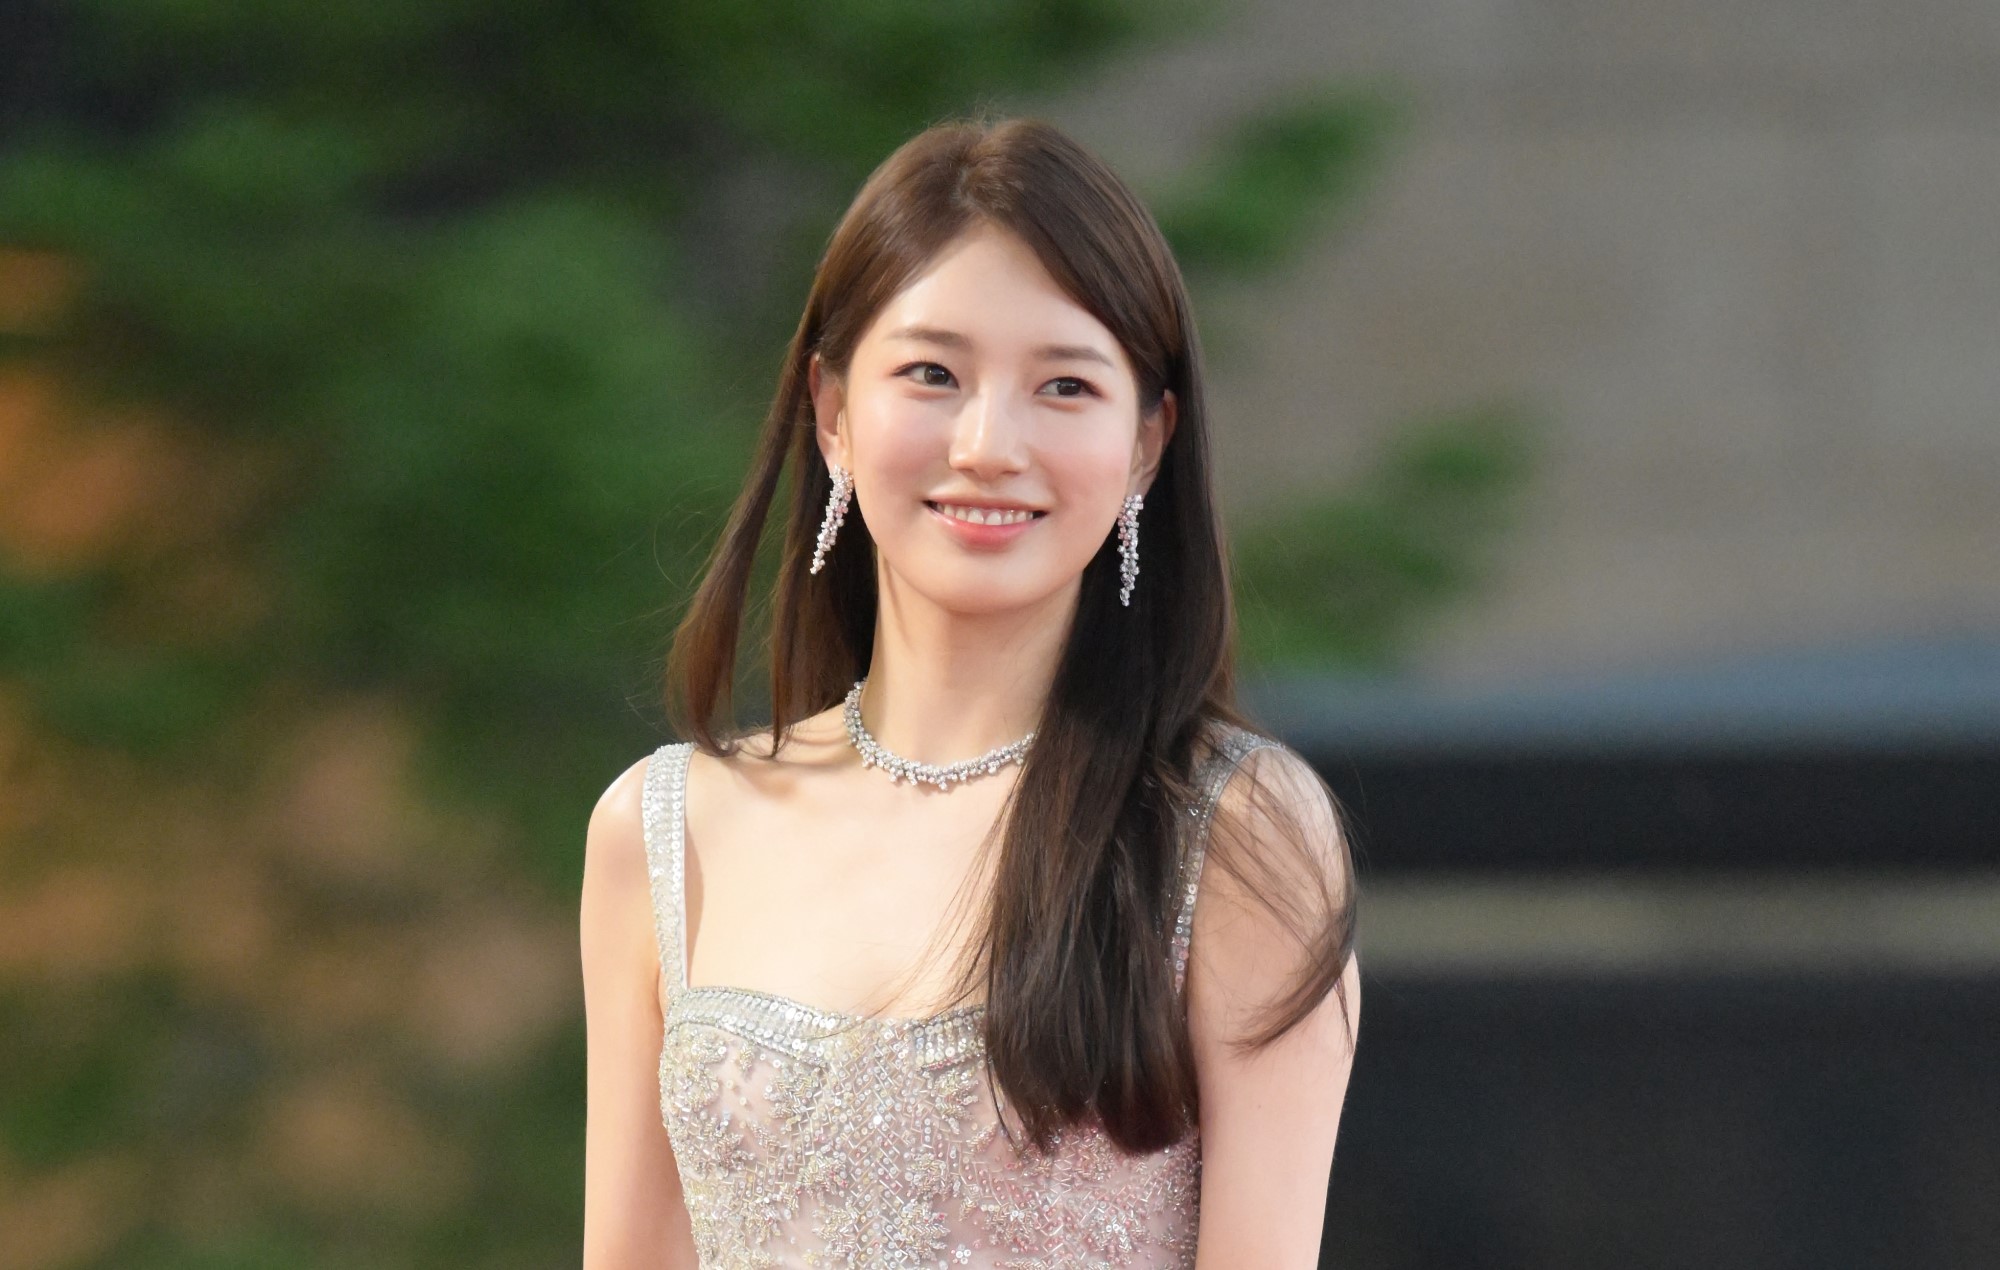 Bae Suzy says she might retire from the industry “at any time”